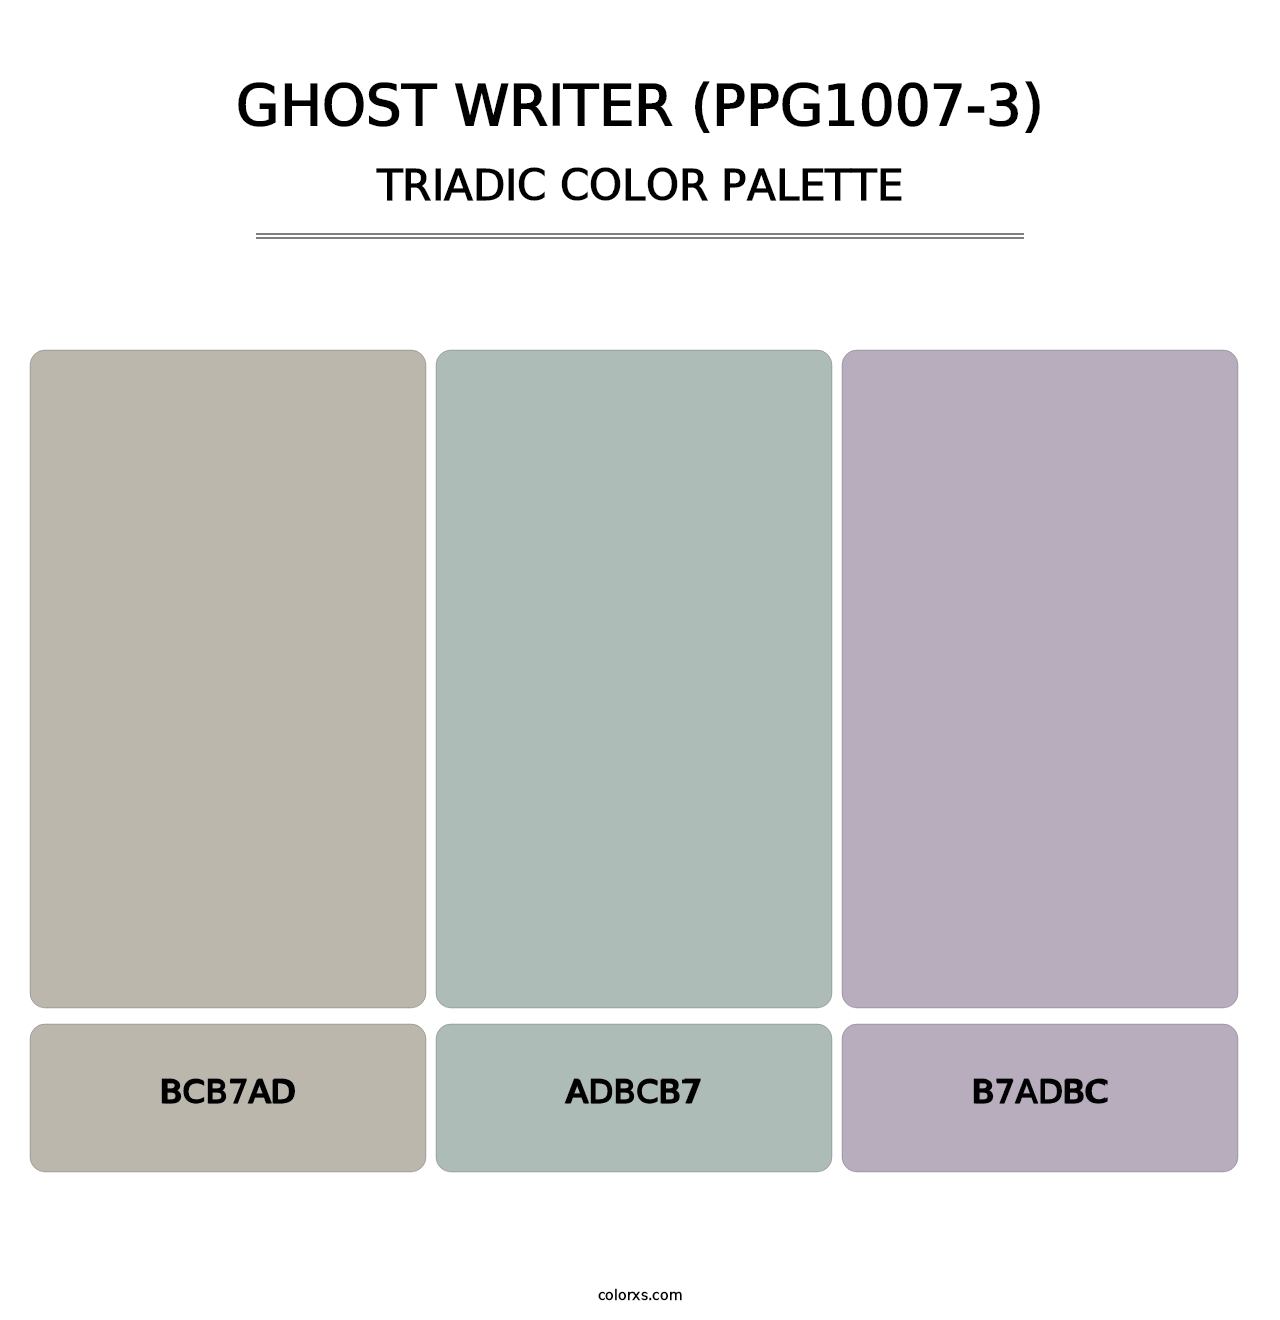 Ghost Writer (PPG1007-3) - Triadic Color Palette